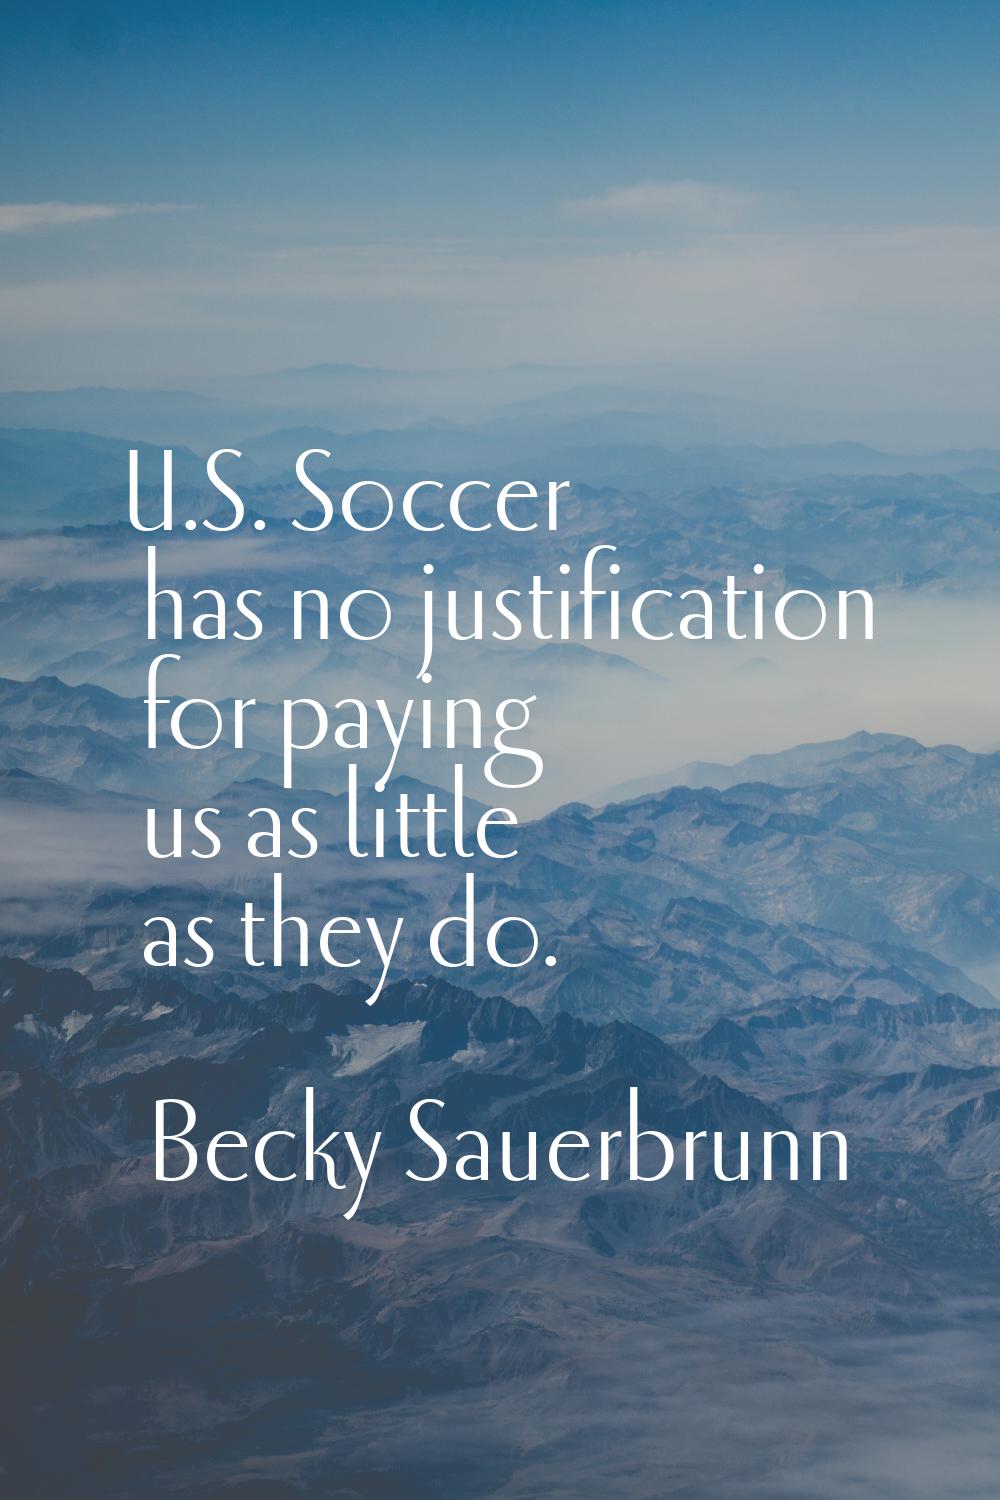 U.S. Soccer has no justification for paying us as little as they do.